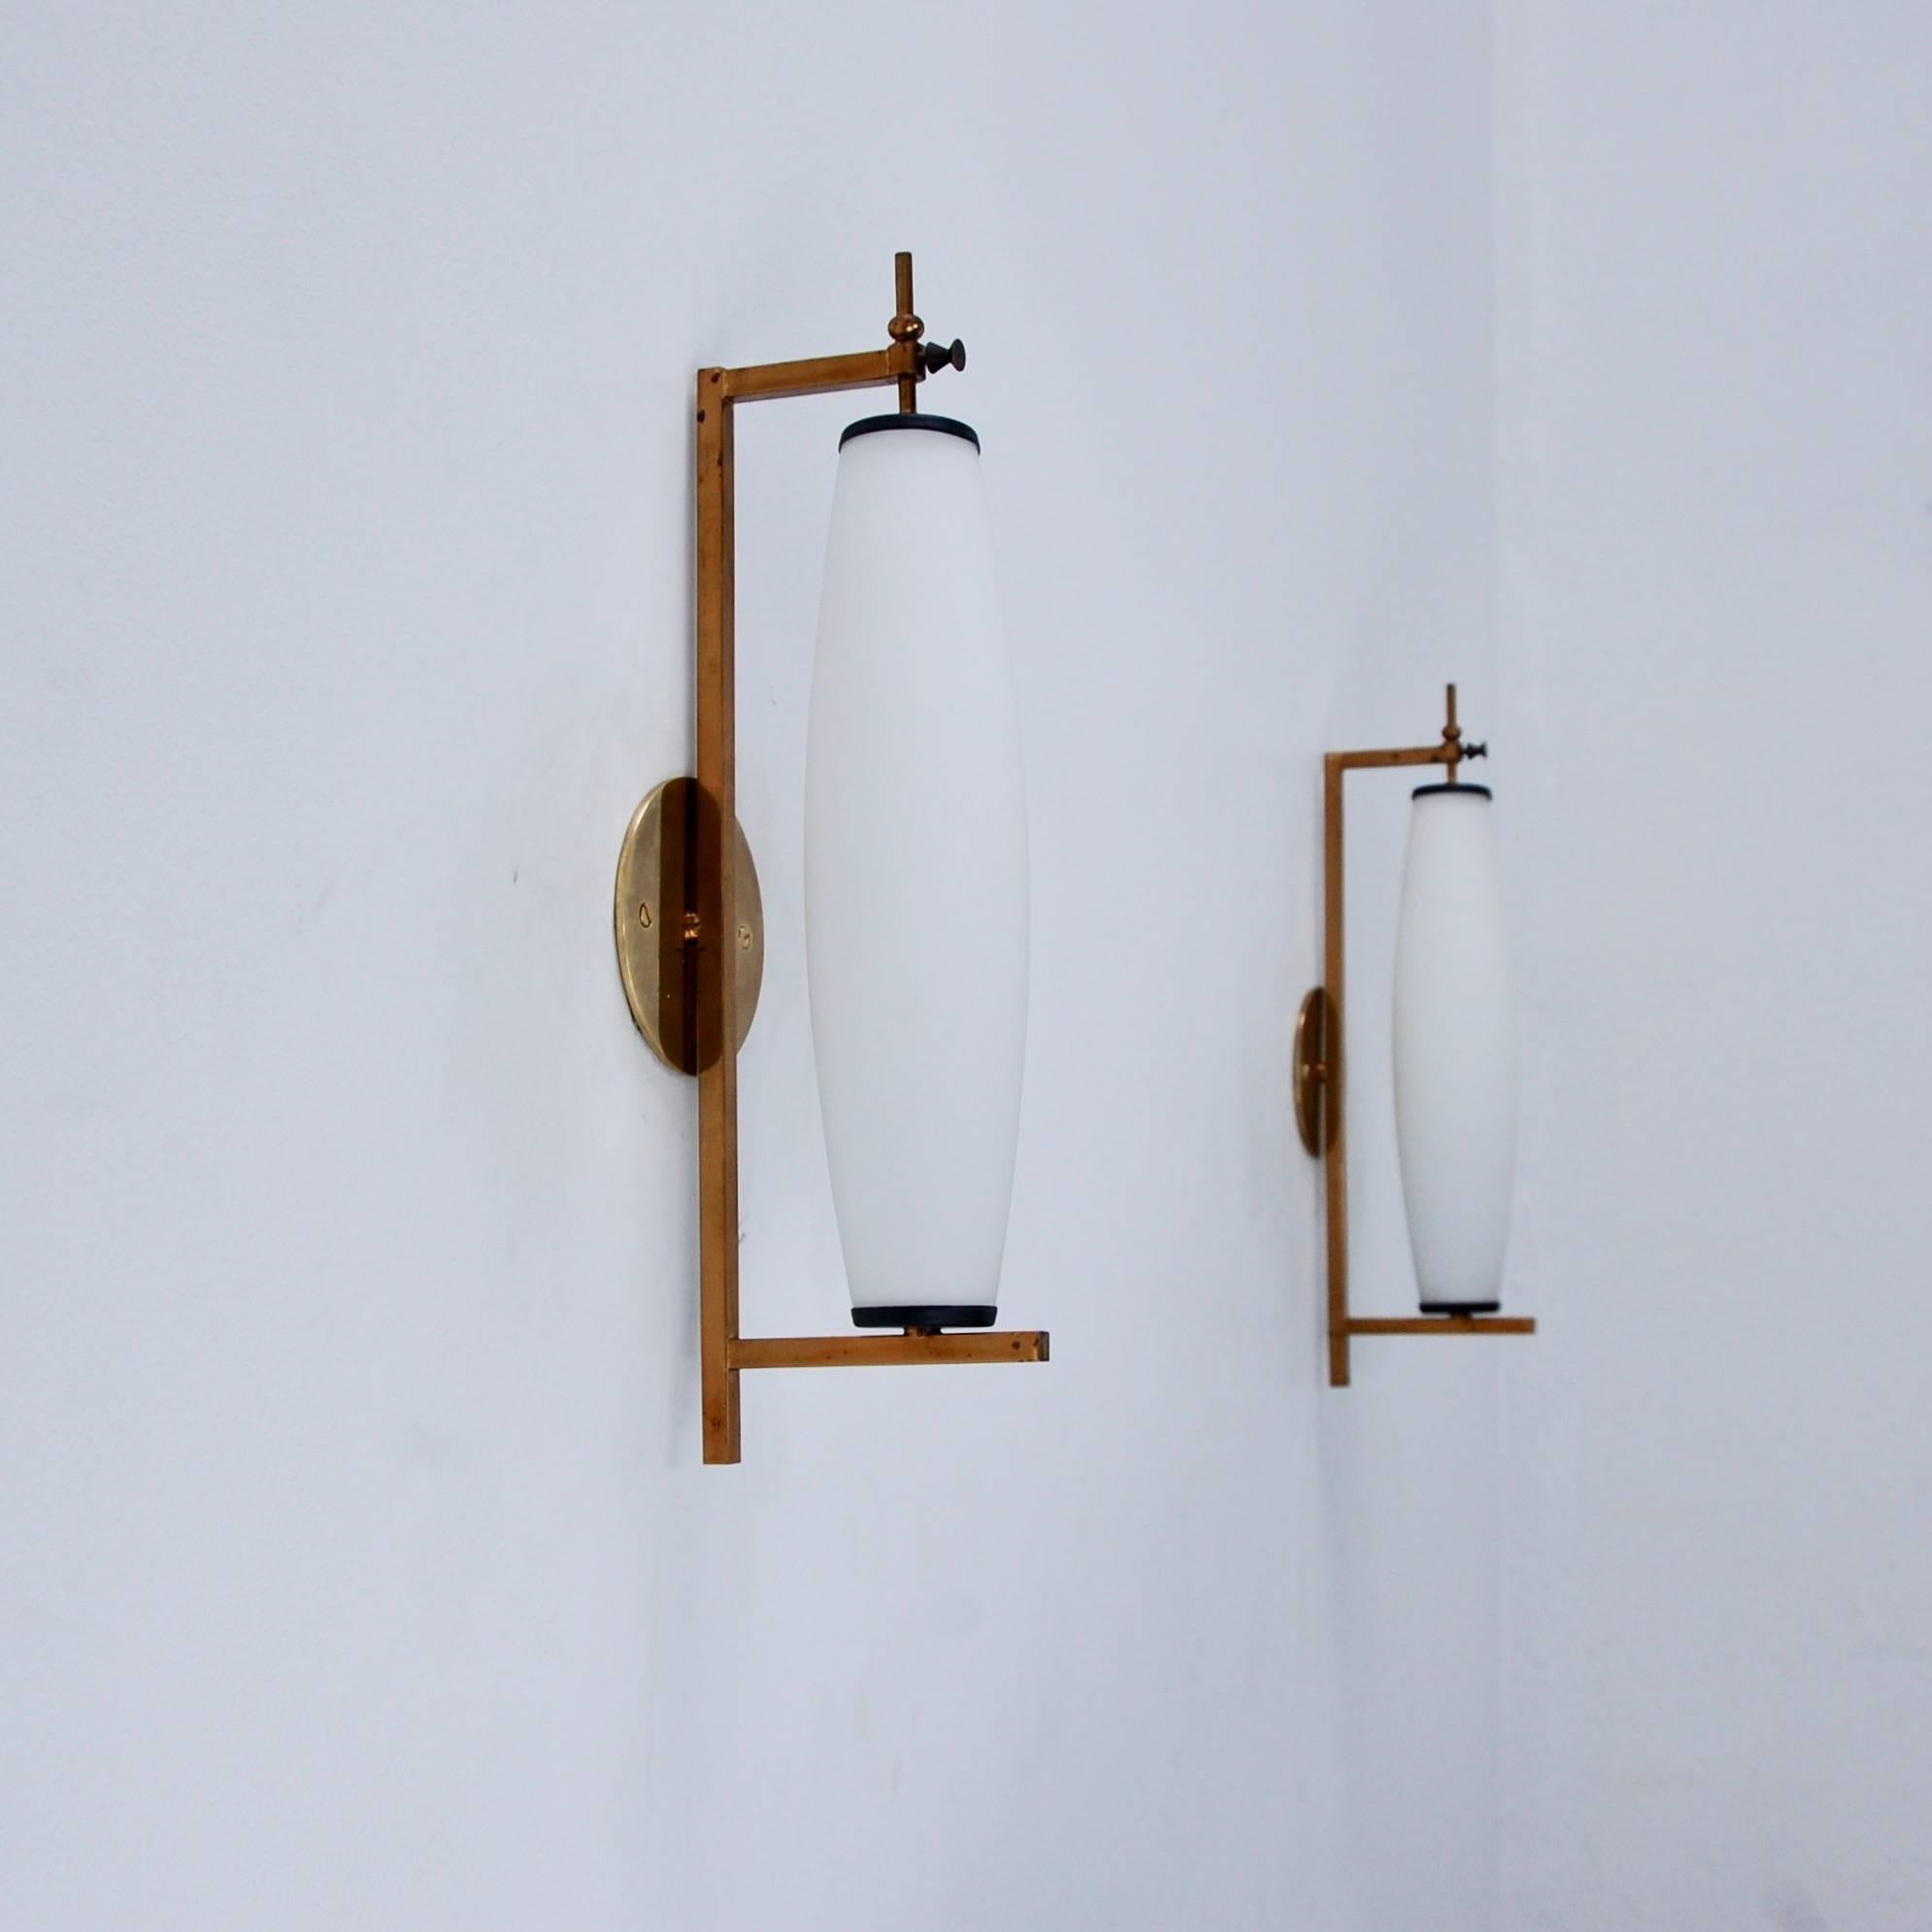 Pair of classic long and tall midcentury brass, aluminum and glass sconces from Italy, with original finish, patina lacquered brass, and glass. Single E12 based socket per sconce. Maximum wattage 75 watts per sconce. Back plate has 2 ¾” center to